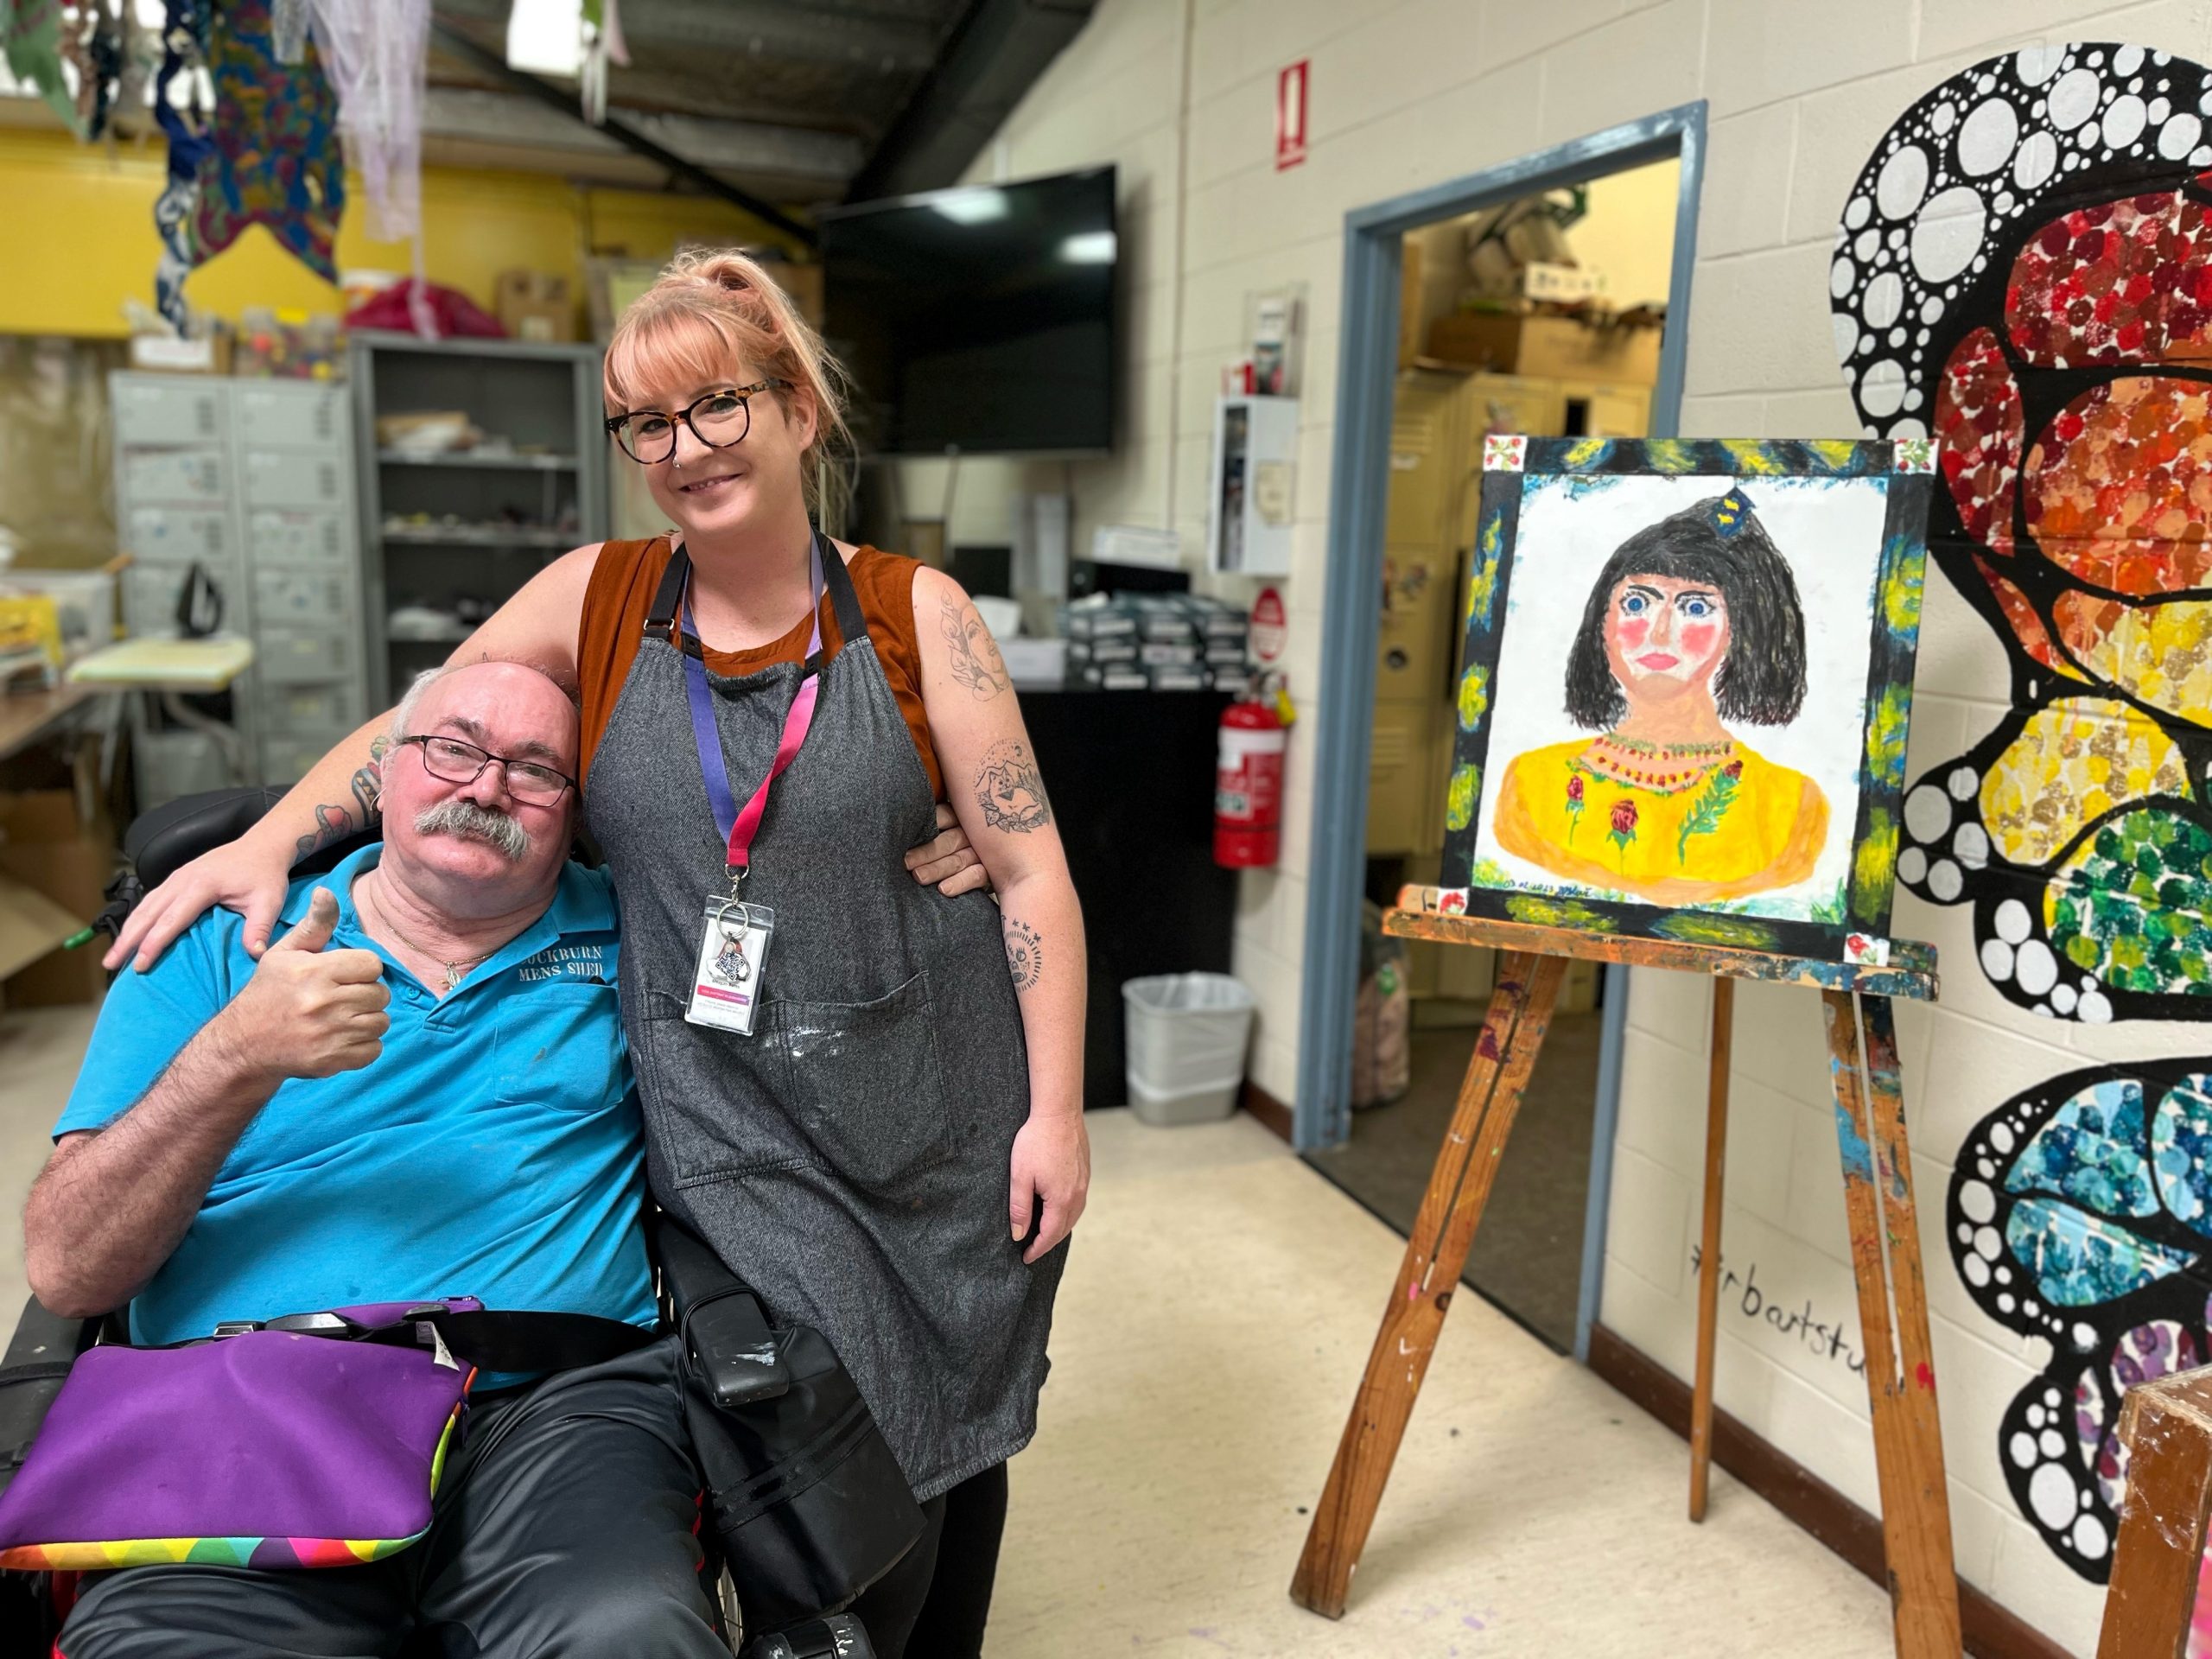 Artist Blaz with Rocky Bay Support Worker Meagan in the Studio. Blaz's colourful artwork if featured on an easel next to Meagan